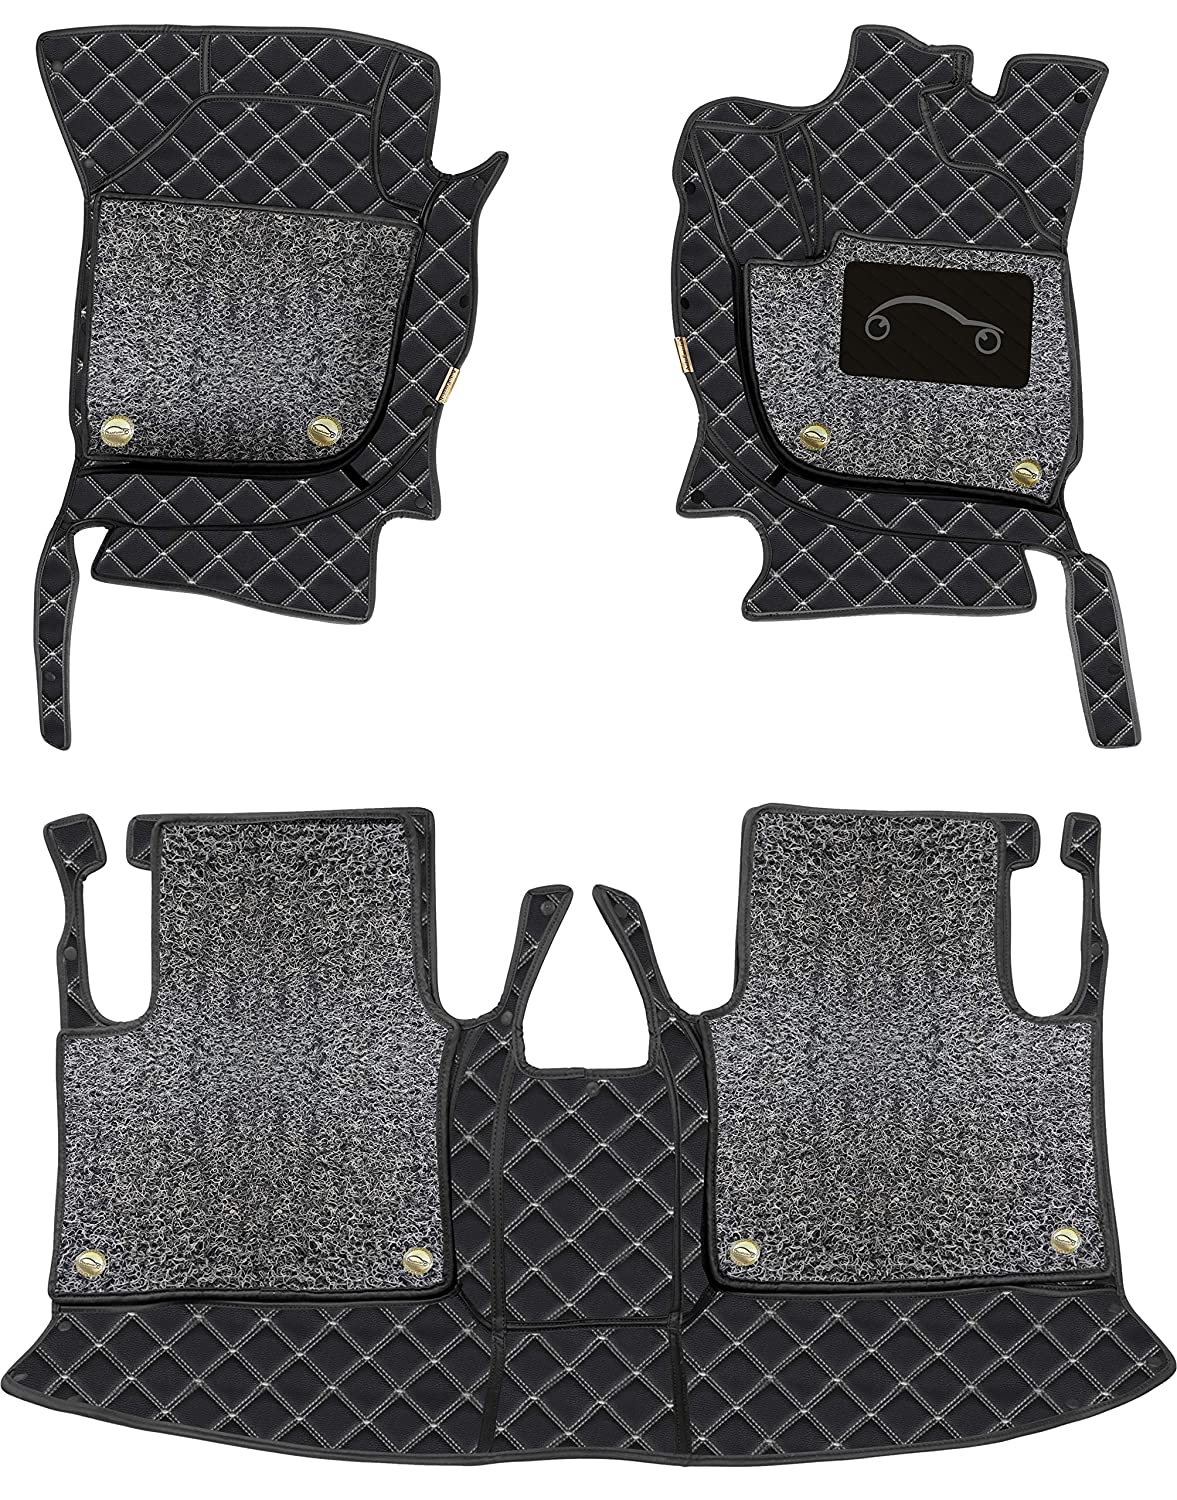 Land Rover Discovery Sport HSE (7 Seater) 2020 7D Luxury Car Mat, All Weather Proof, Anti-Skid, 100% Waterproof & Odorless with Unique Diamond Fish Design (24mm Luxury PU Leather, 2 Rows)